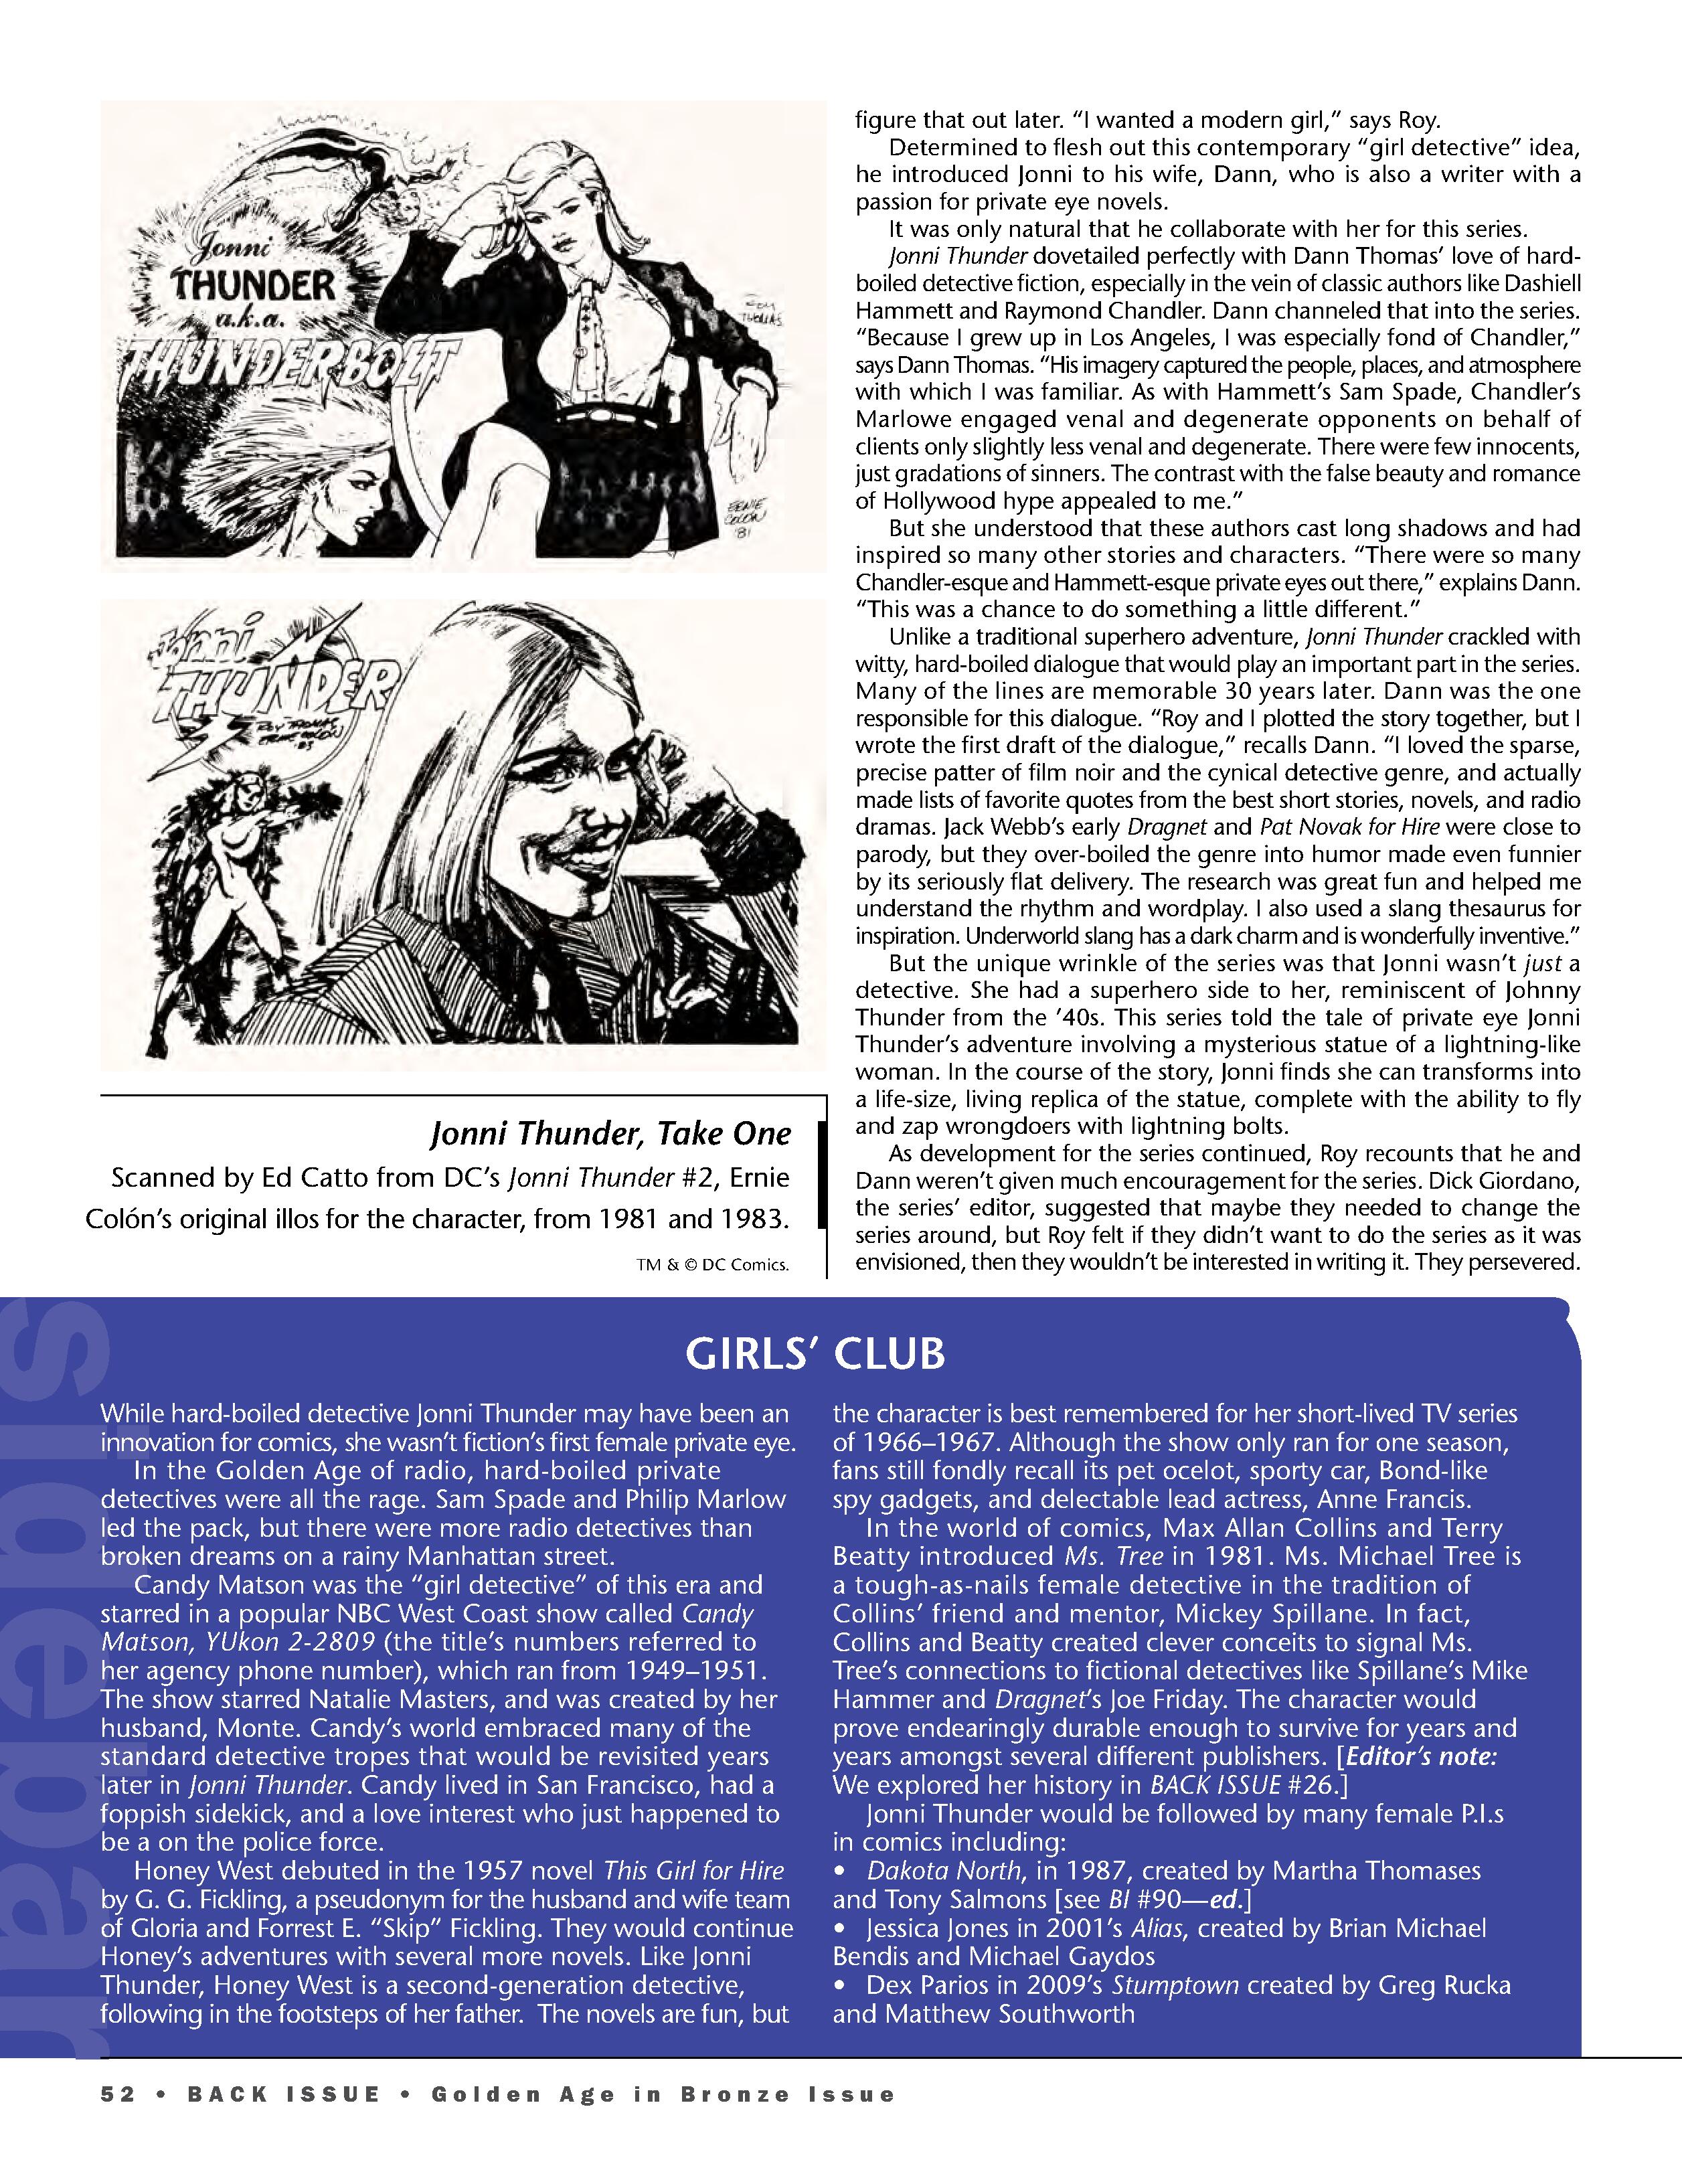 Read online Back Issue comic -  Issue #106 - 54